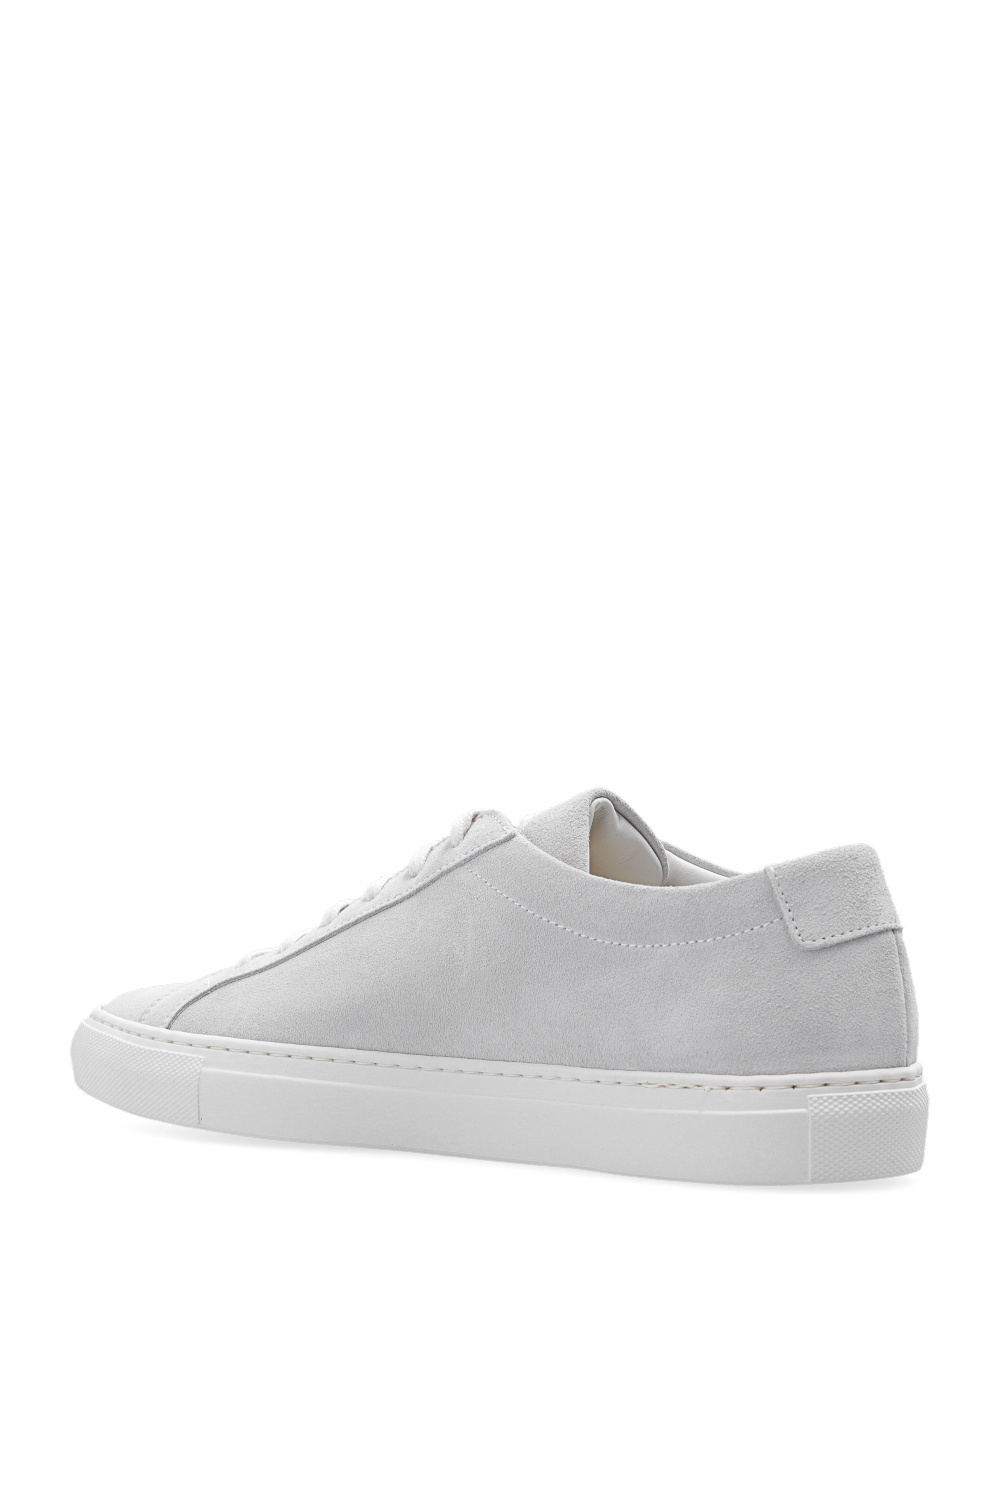 Common Projects ‘Achilles Low’ Boots sneakers